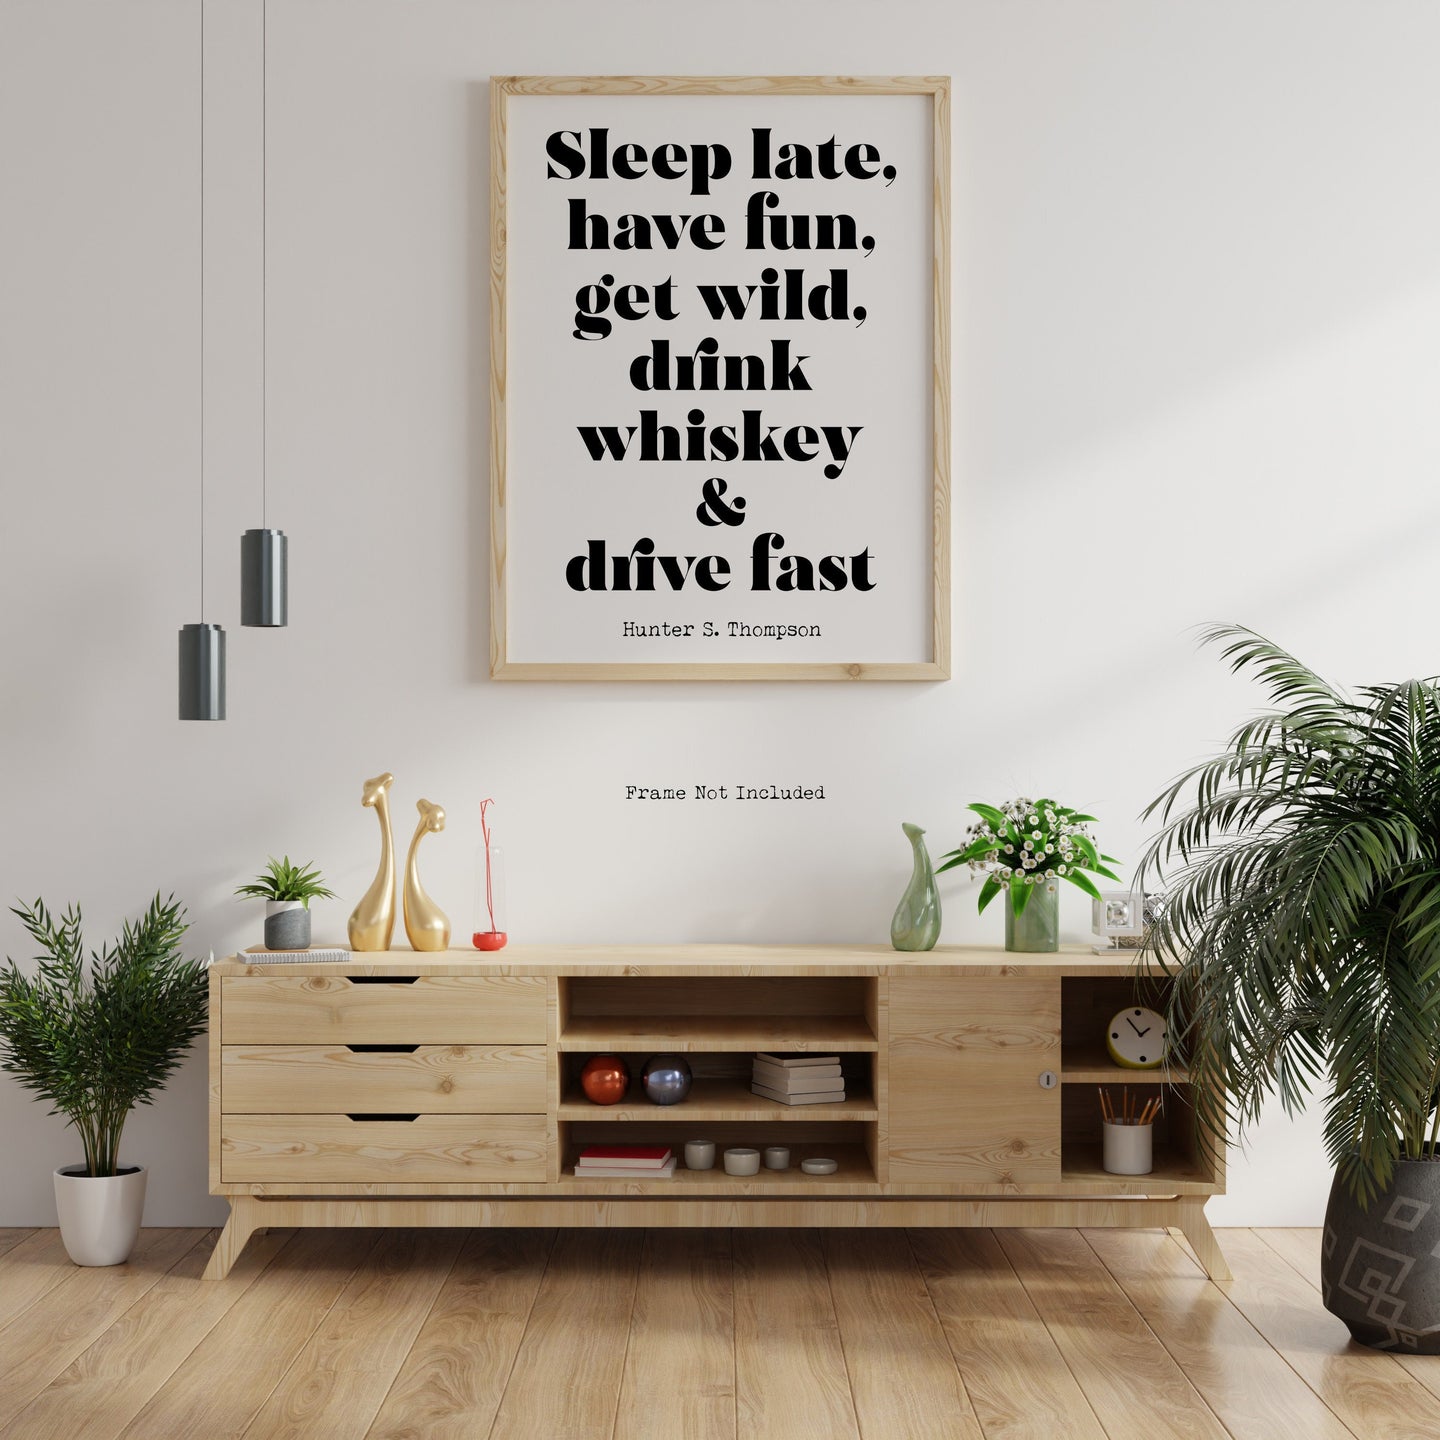 Hunter S Thompson - Sleep late, have fun, get wild, drink whiskey and drive fast - literary print wall art Hunter Thompson UNFRAMED